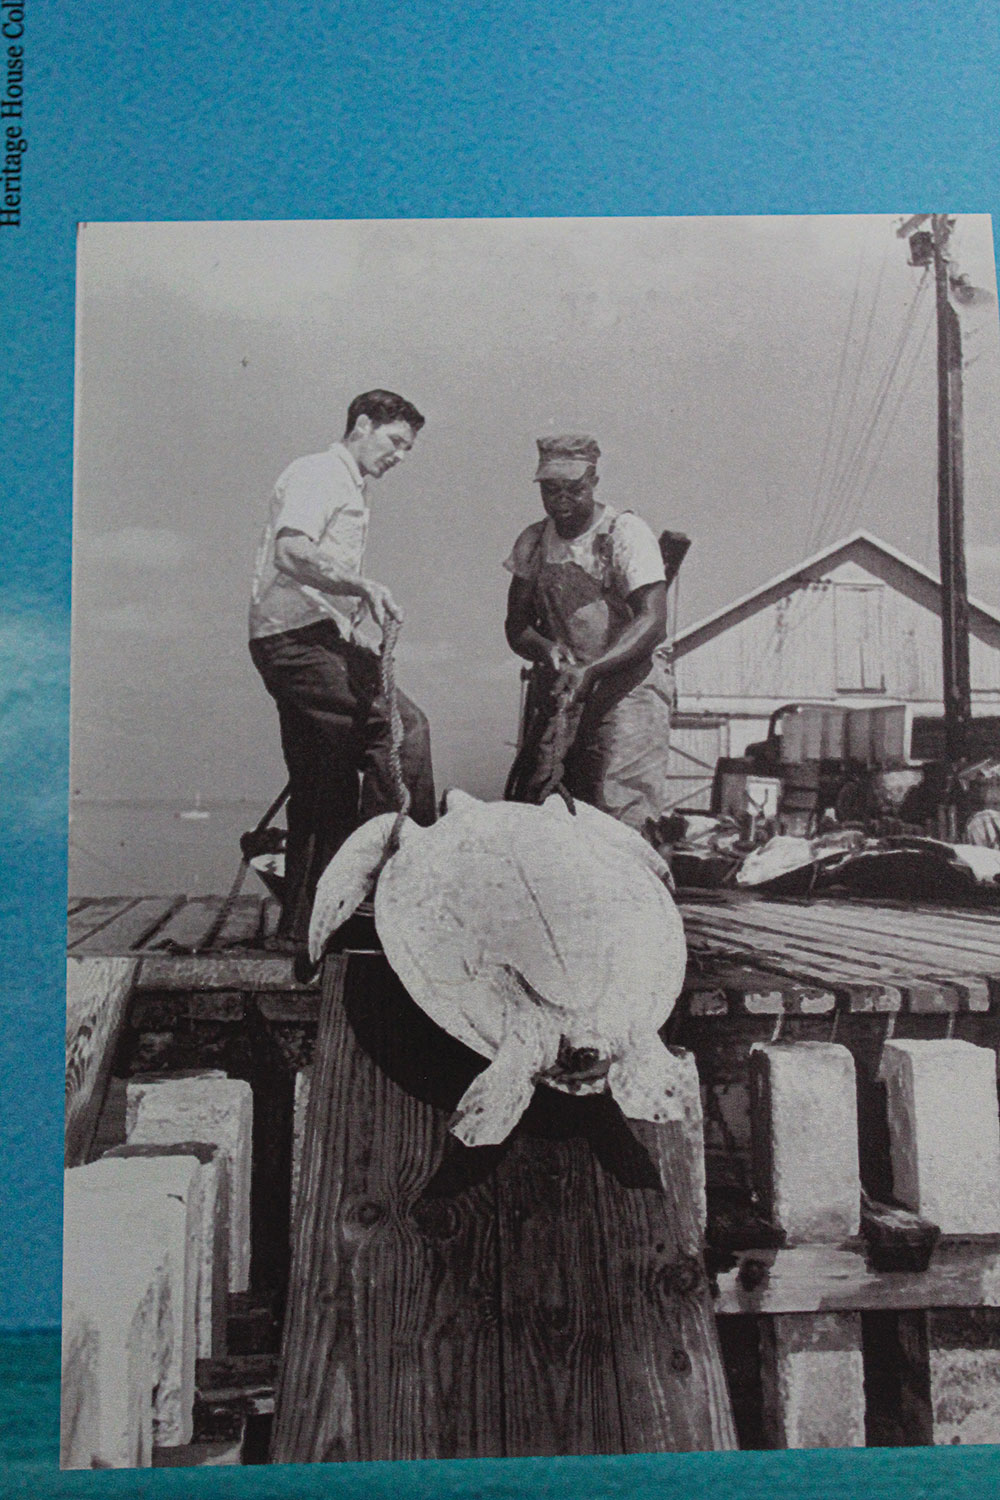 The Key West area was home to a turtling industry for more than 150 years